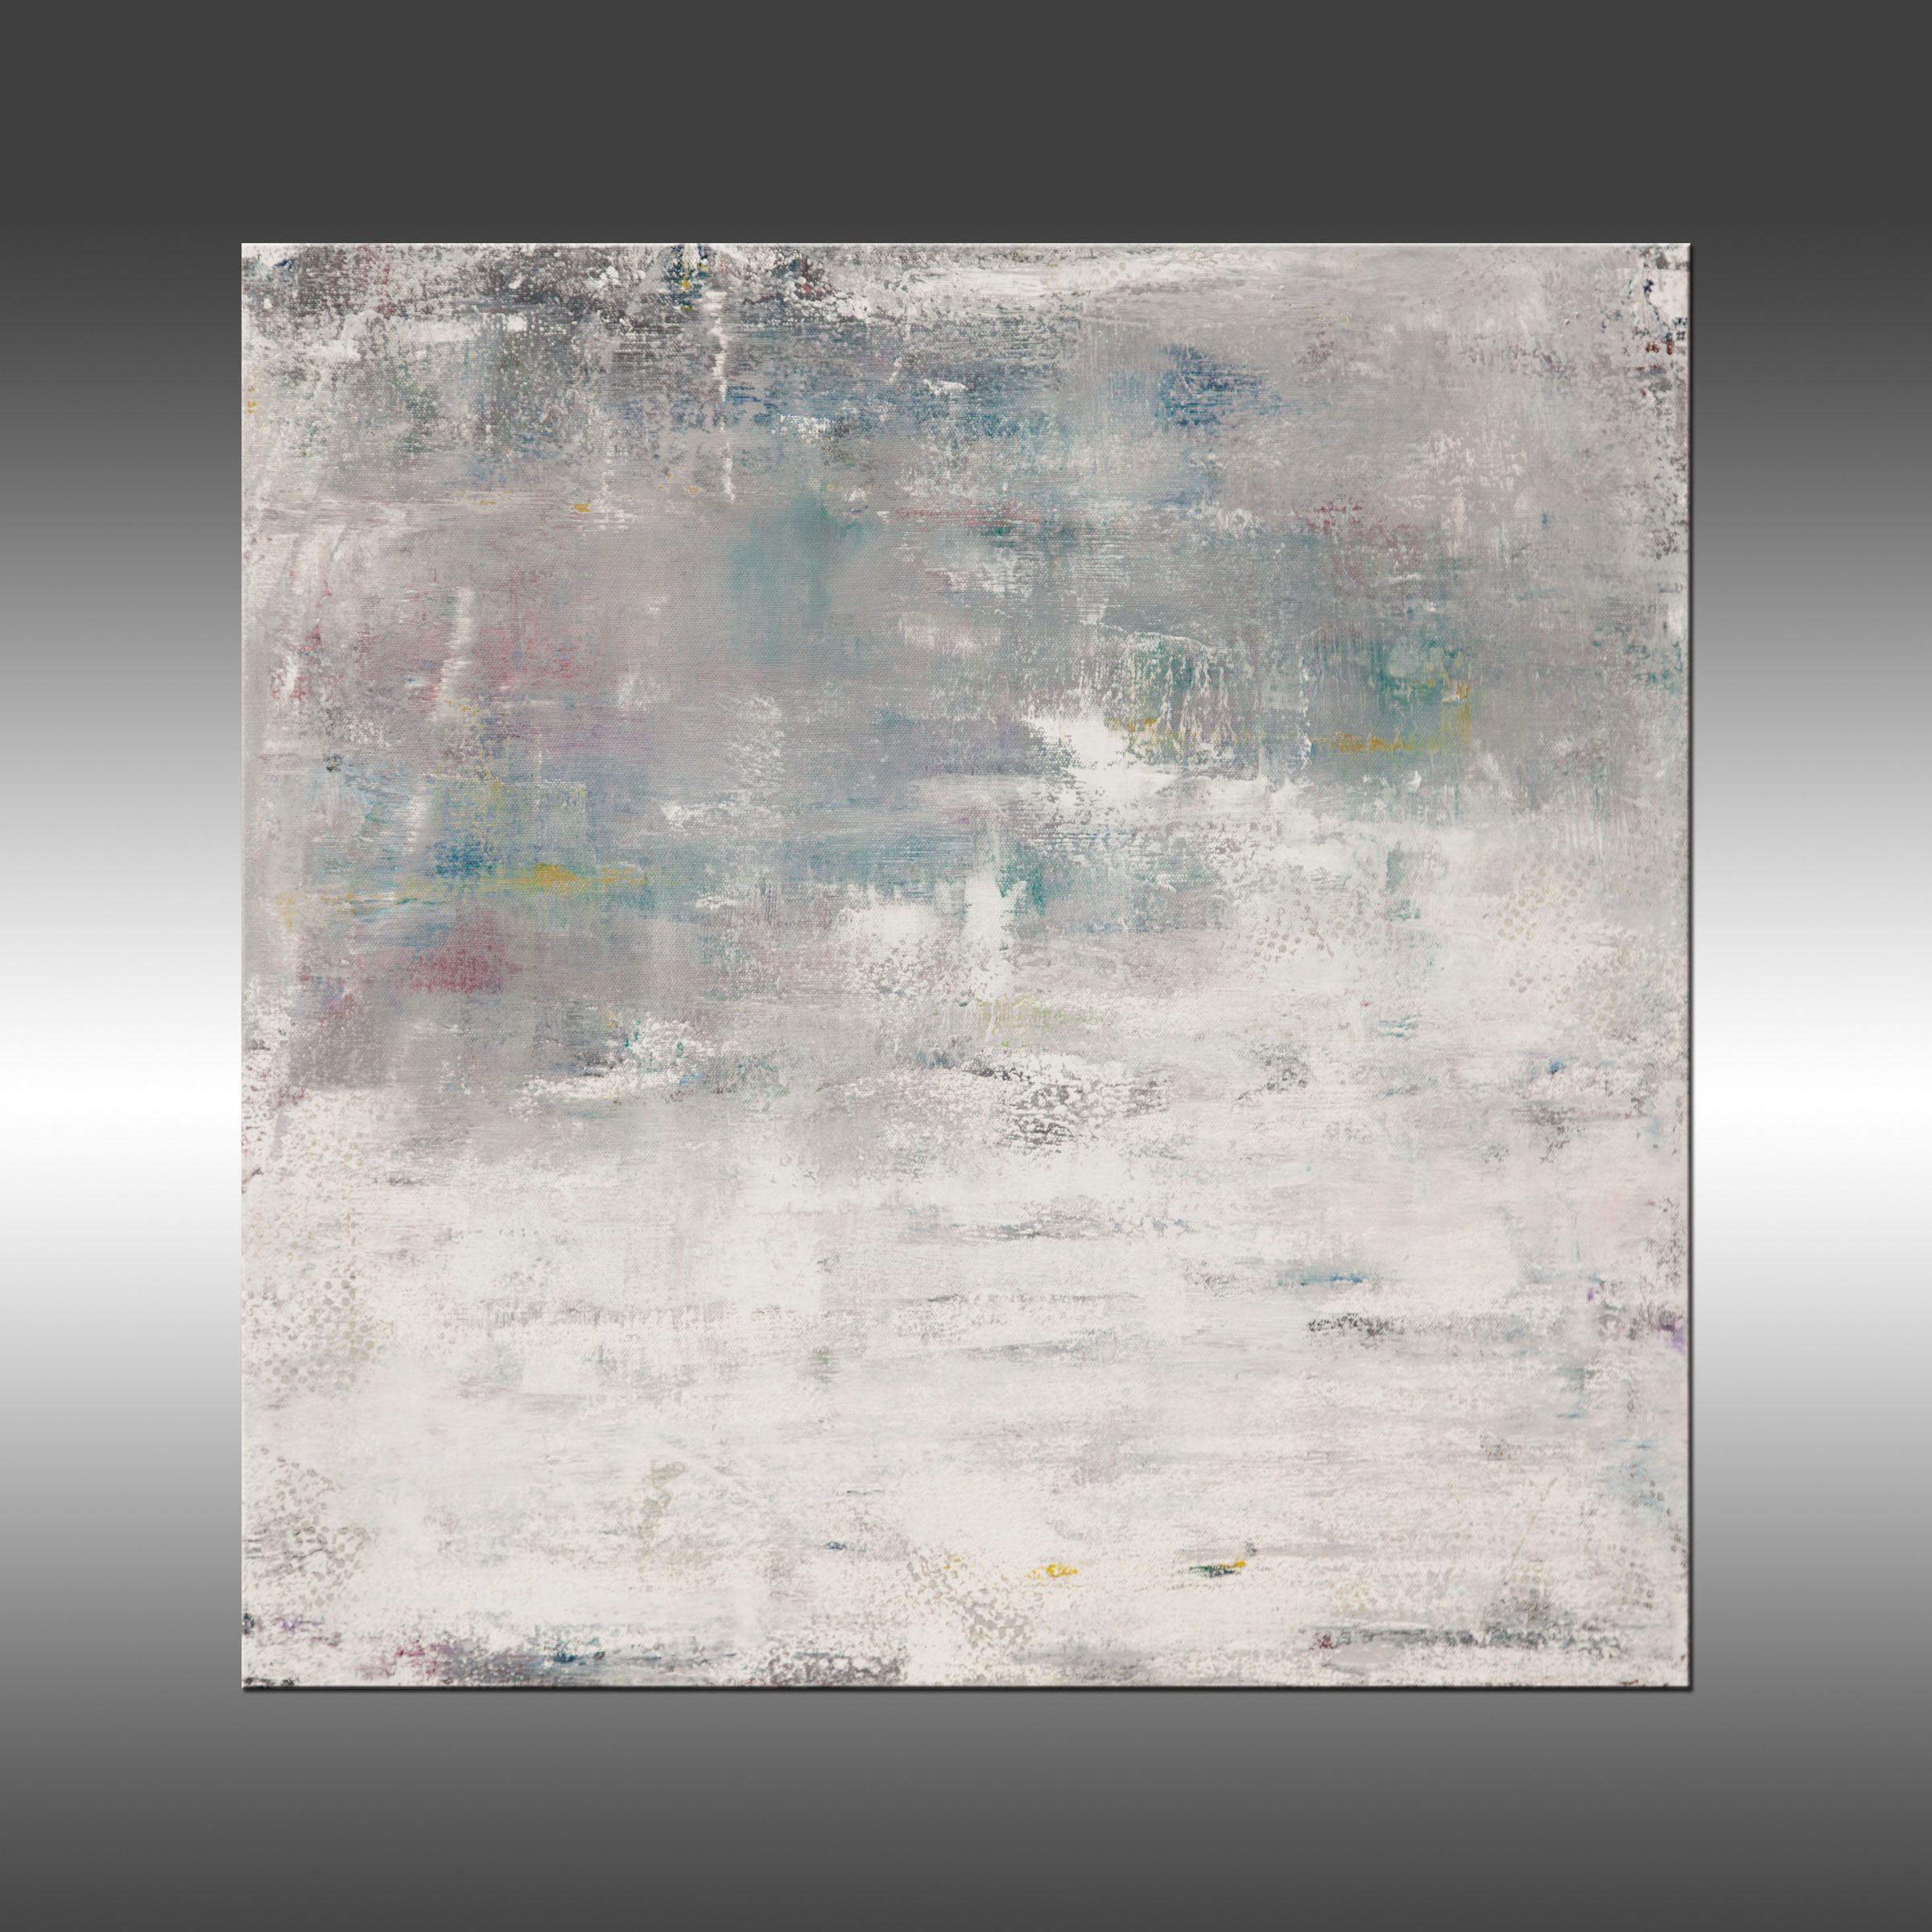 Modern Industrial 52 is an original painting, created with acrylic paint on gallery-wrapped canvas. It has a width of 24 inches and a height of 24 inches with a depth of 1.5 inches (24x24x1.5).    The colors used in the painting are white, gray,